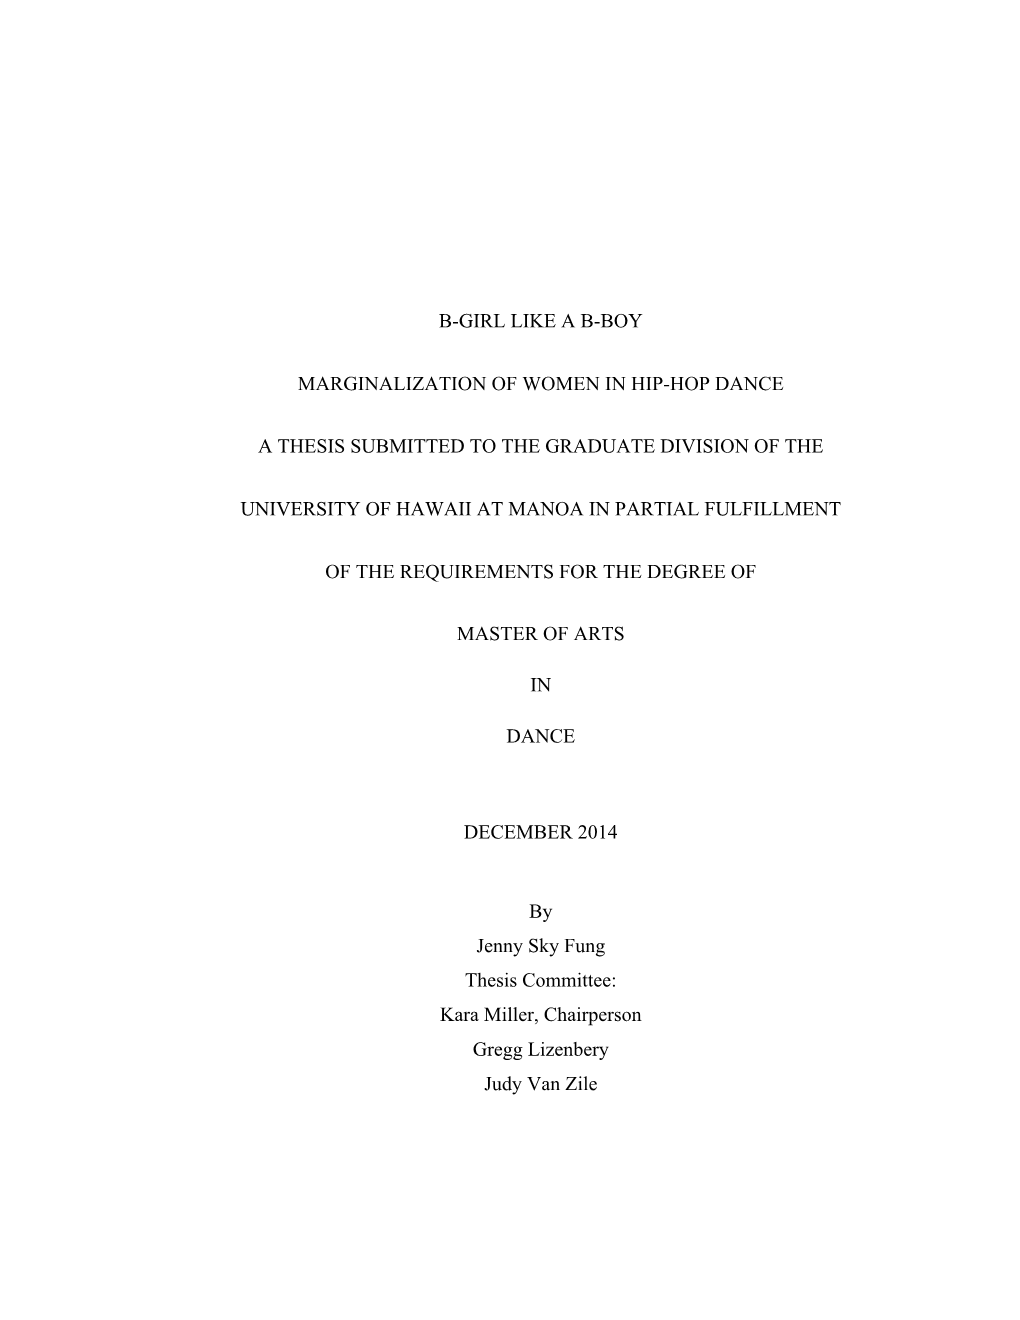 B-Girl Like a B-Boy Marginalization of Women in Hip-Hop Dance a Thesis Submitted to the Graduate Division of the University of H